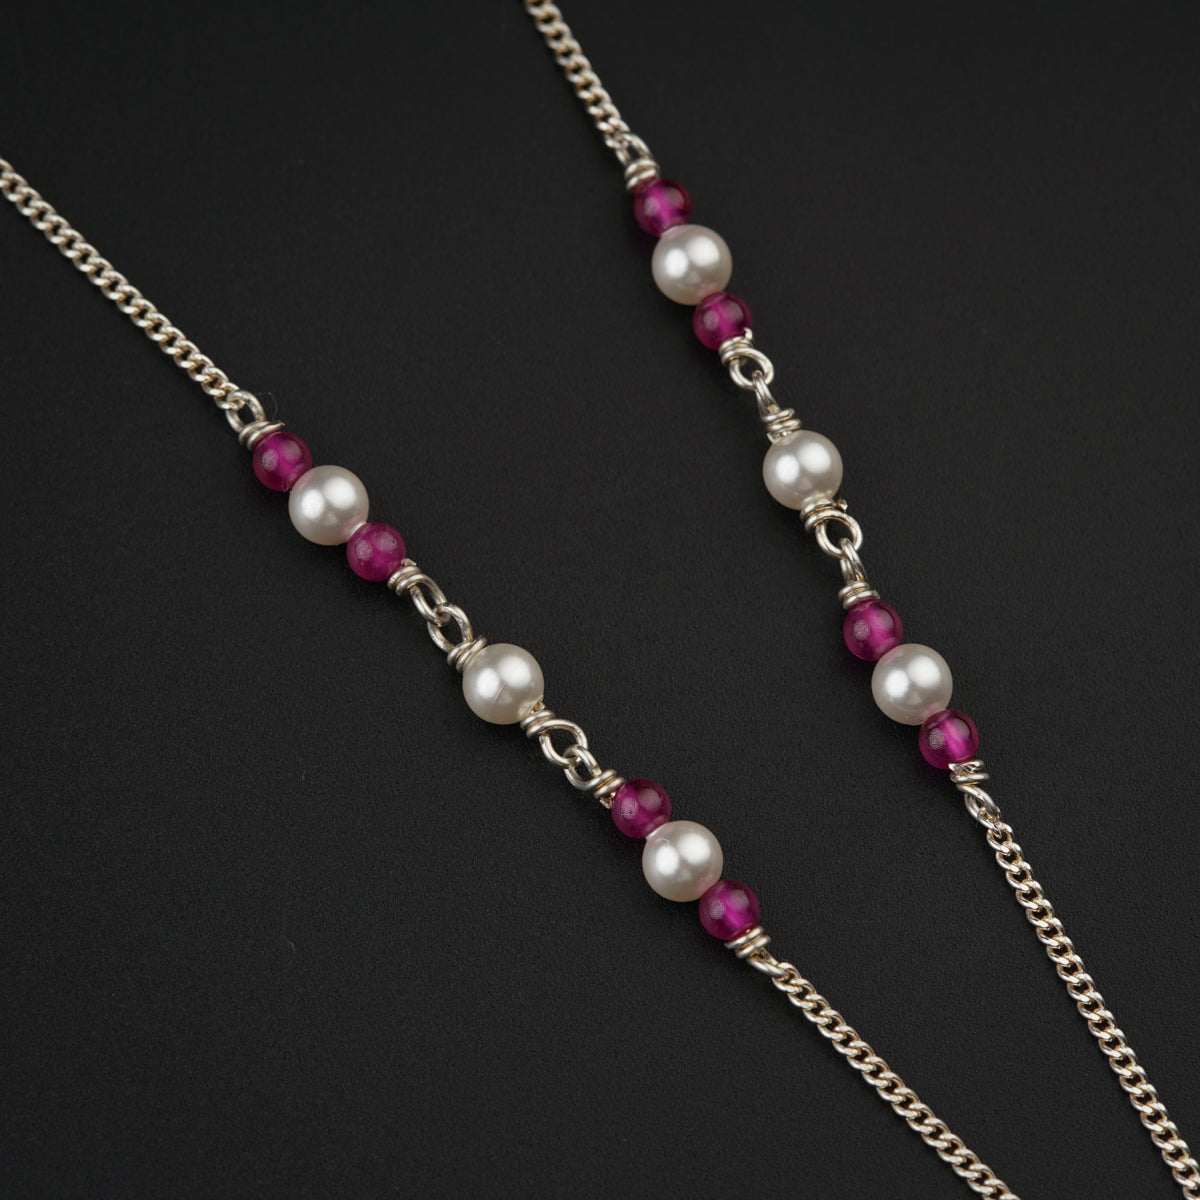 a close up of two necklaces on a black surface